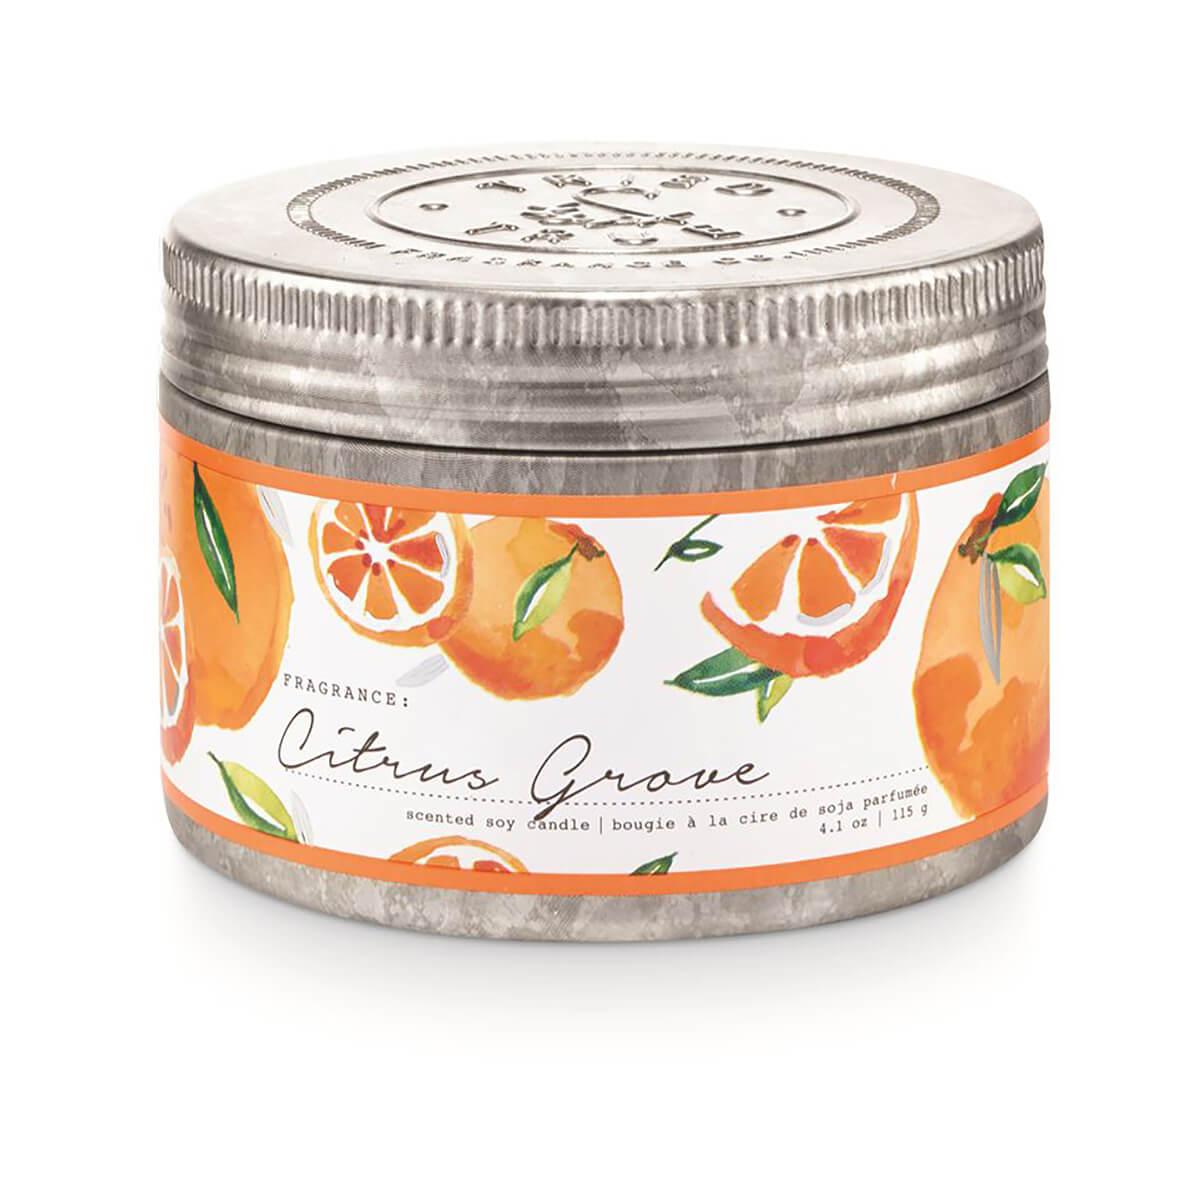  Tried & True Citrus Grove Scented Soy Candle - 4.1 Ounce